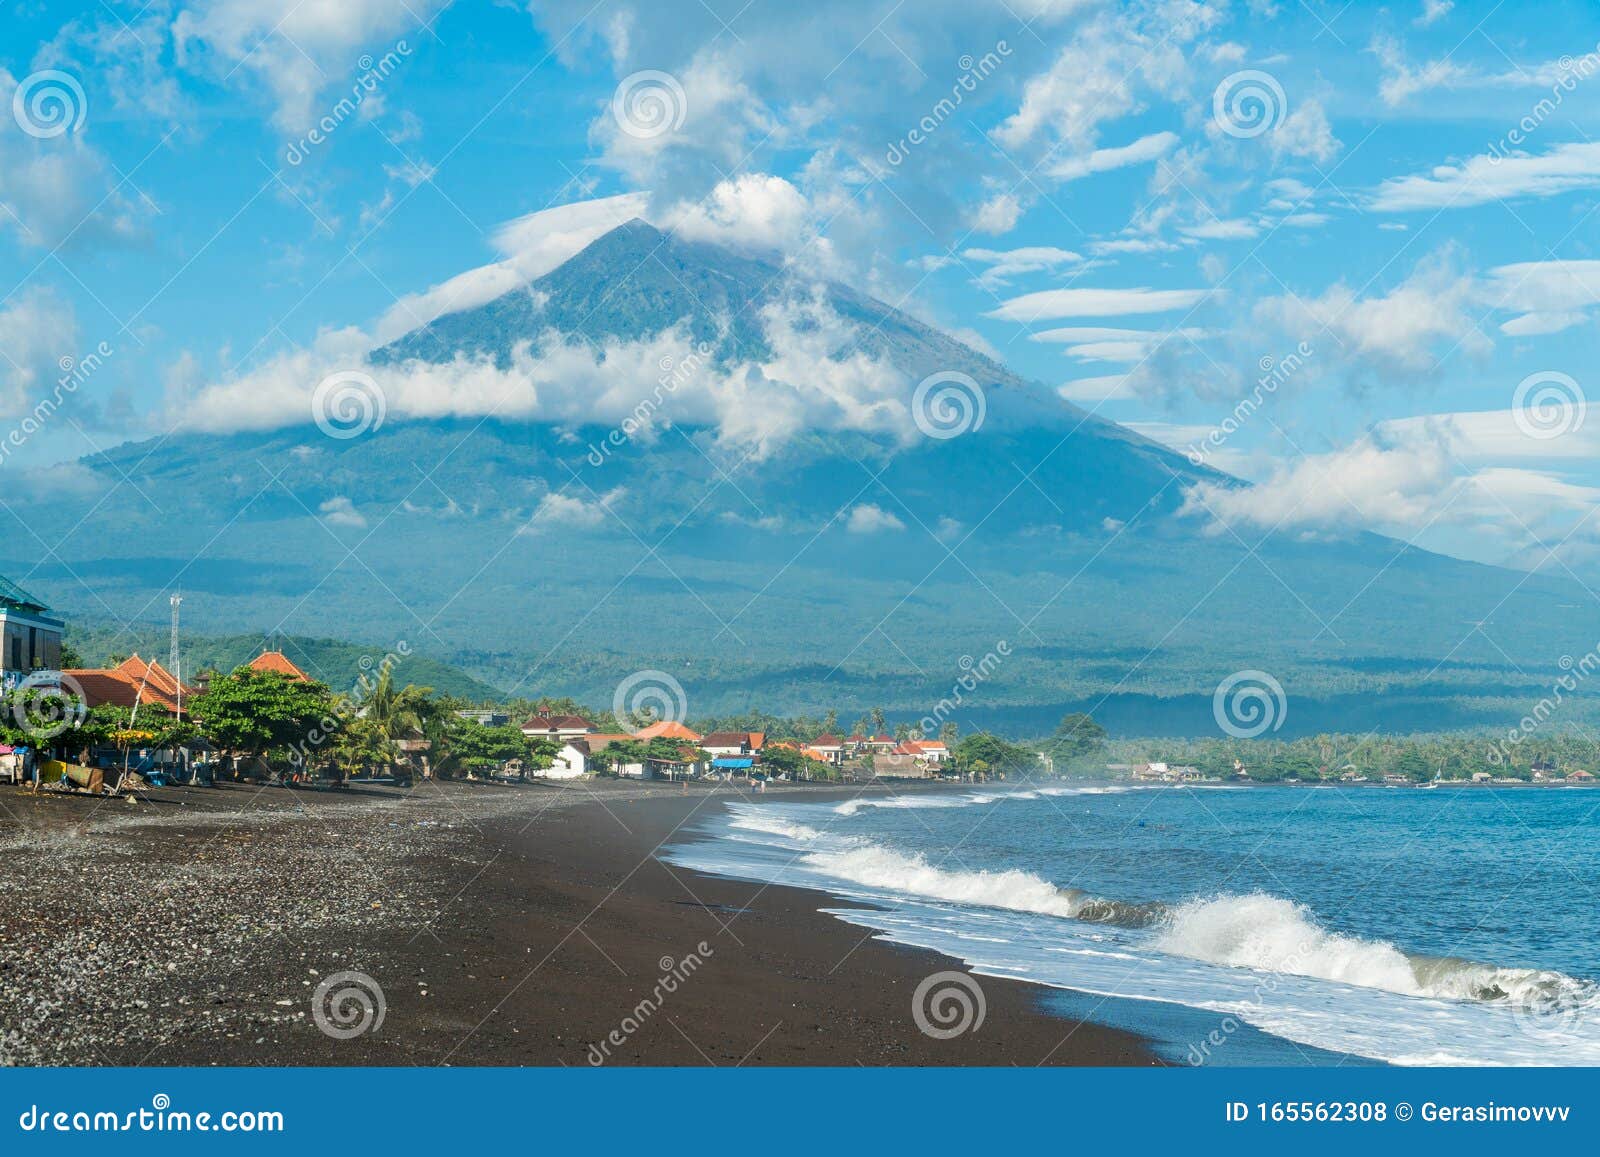 morning sunny view on agung volcano from the coast in amed, bali,  indonesia